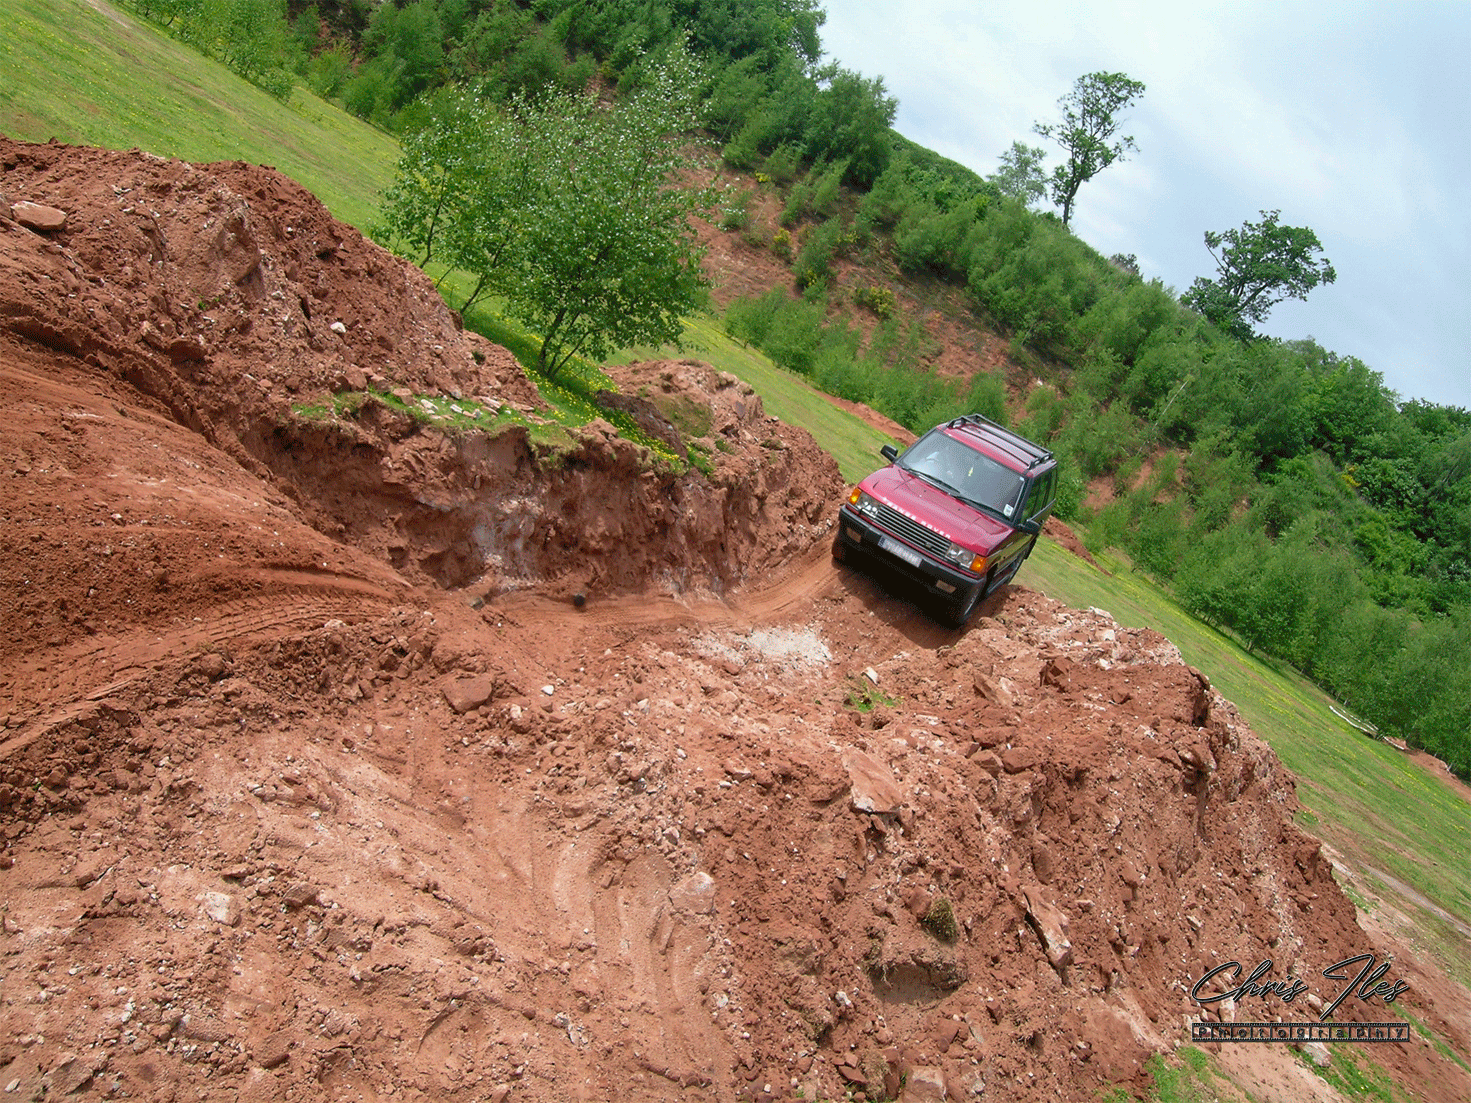 Land Rover’s and Off Roading